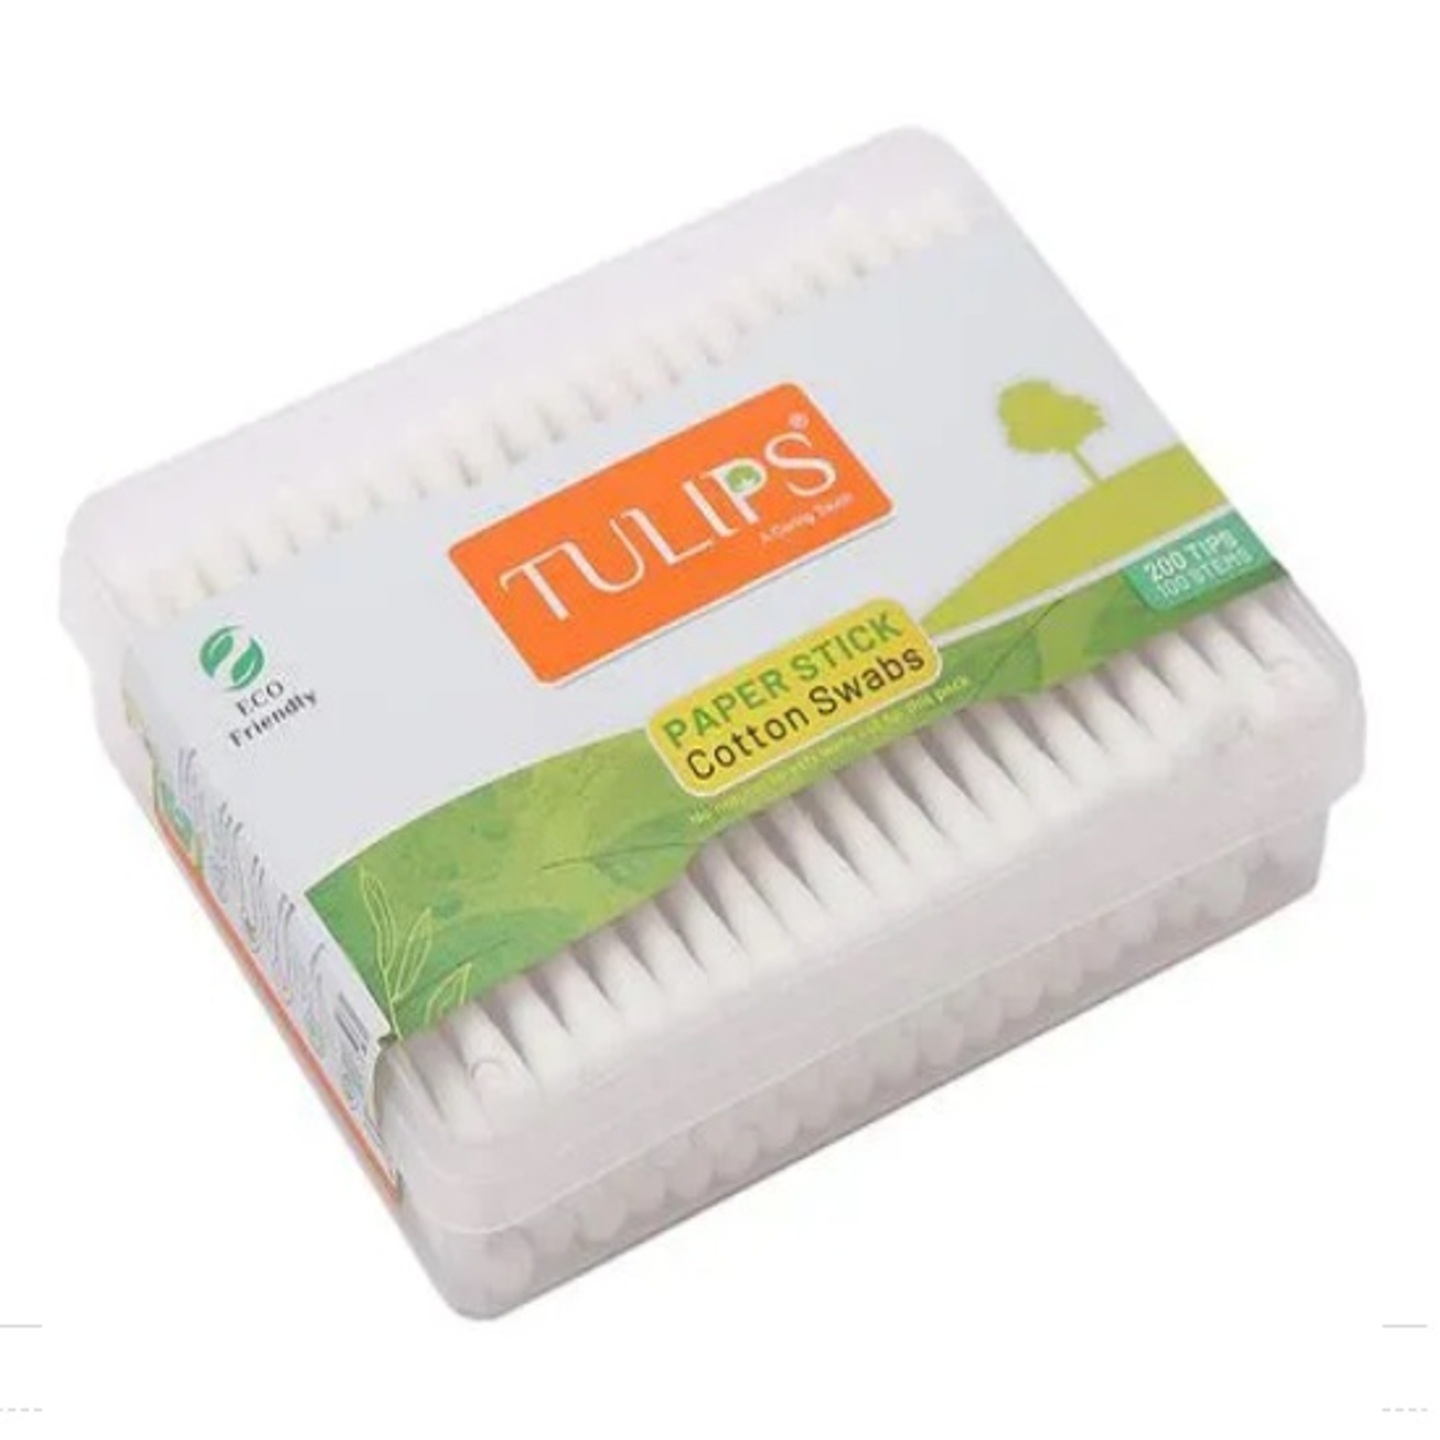 Tulips Cotton Buds - 100 pcs 200 Tips